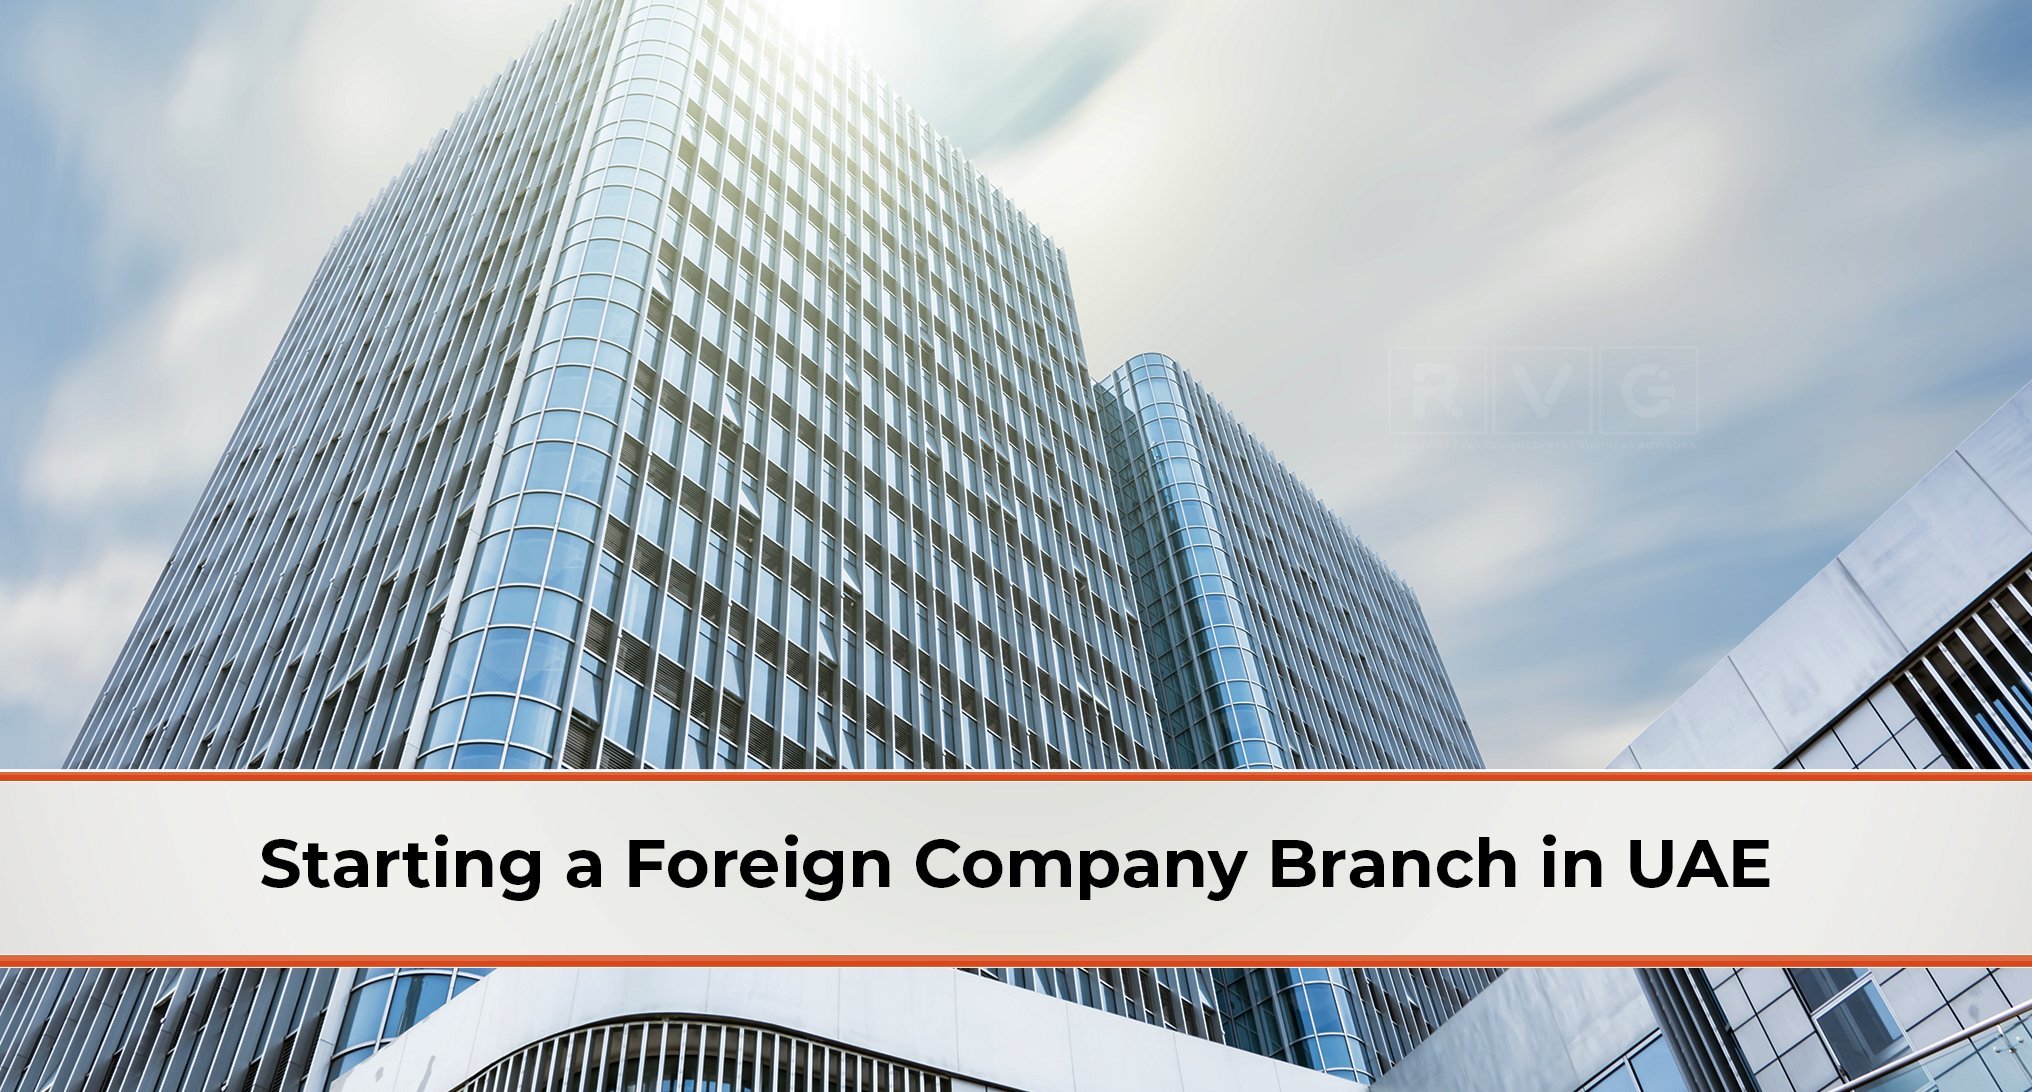 Starting a Foreign Company Branch in UAE